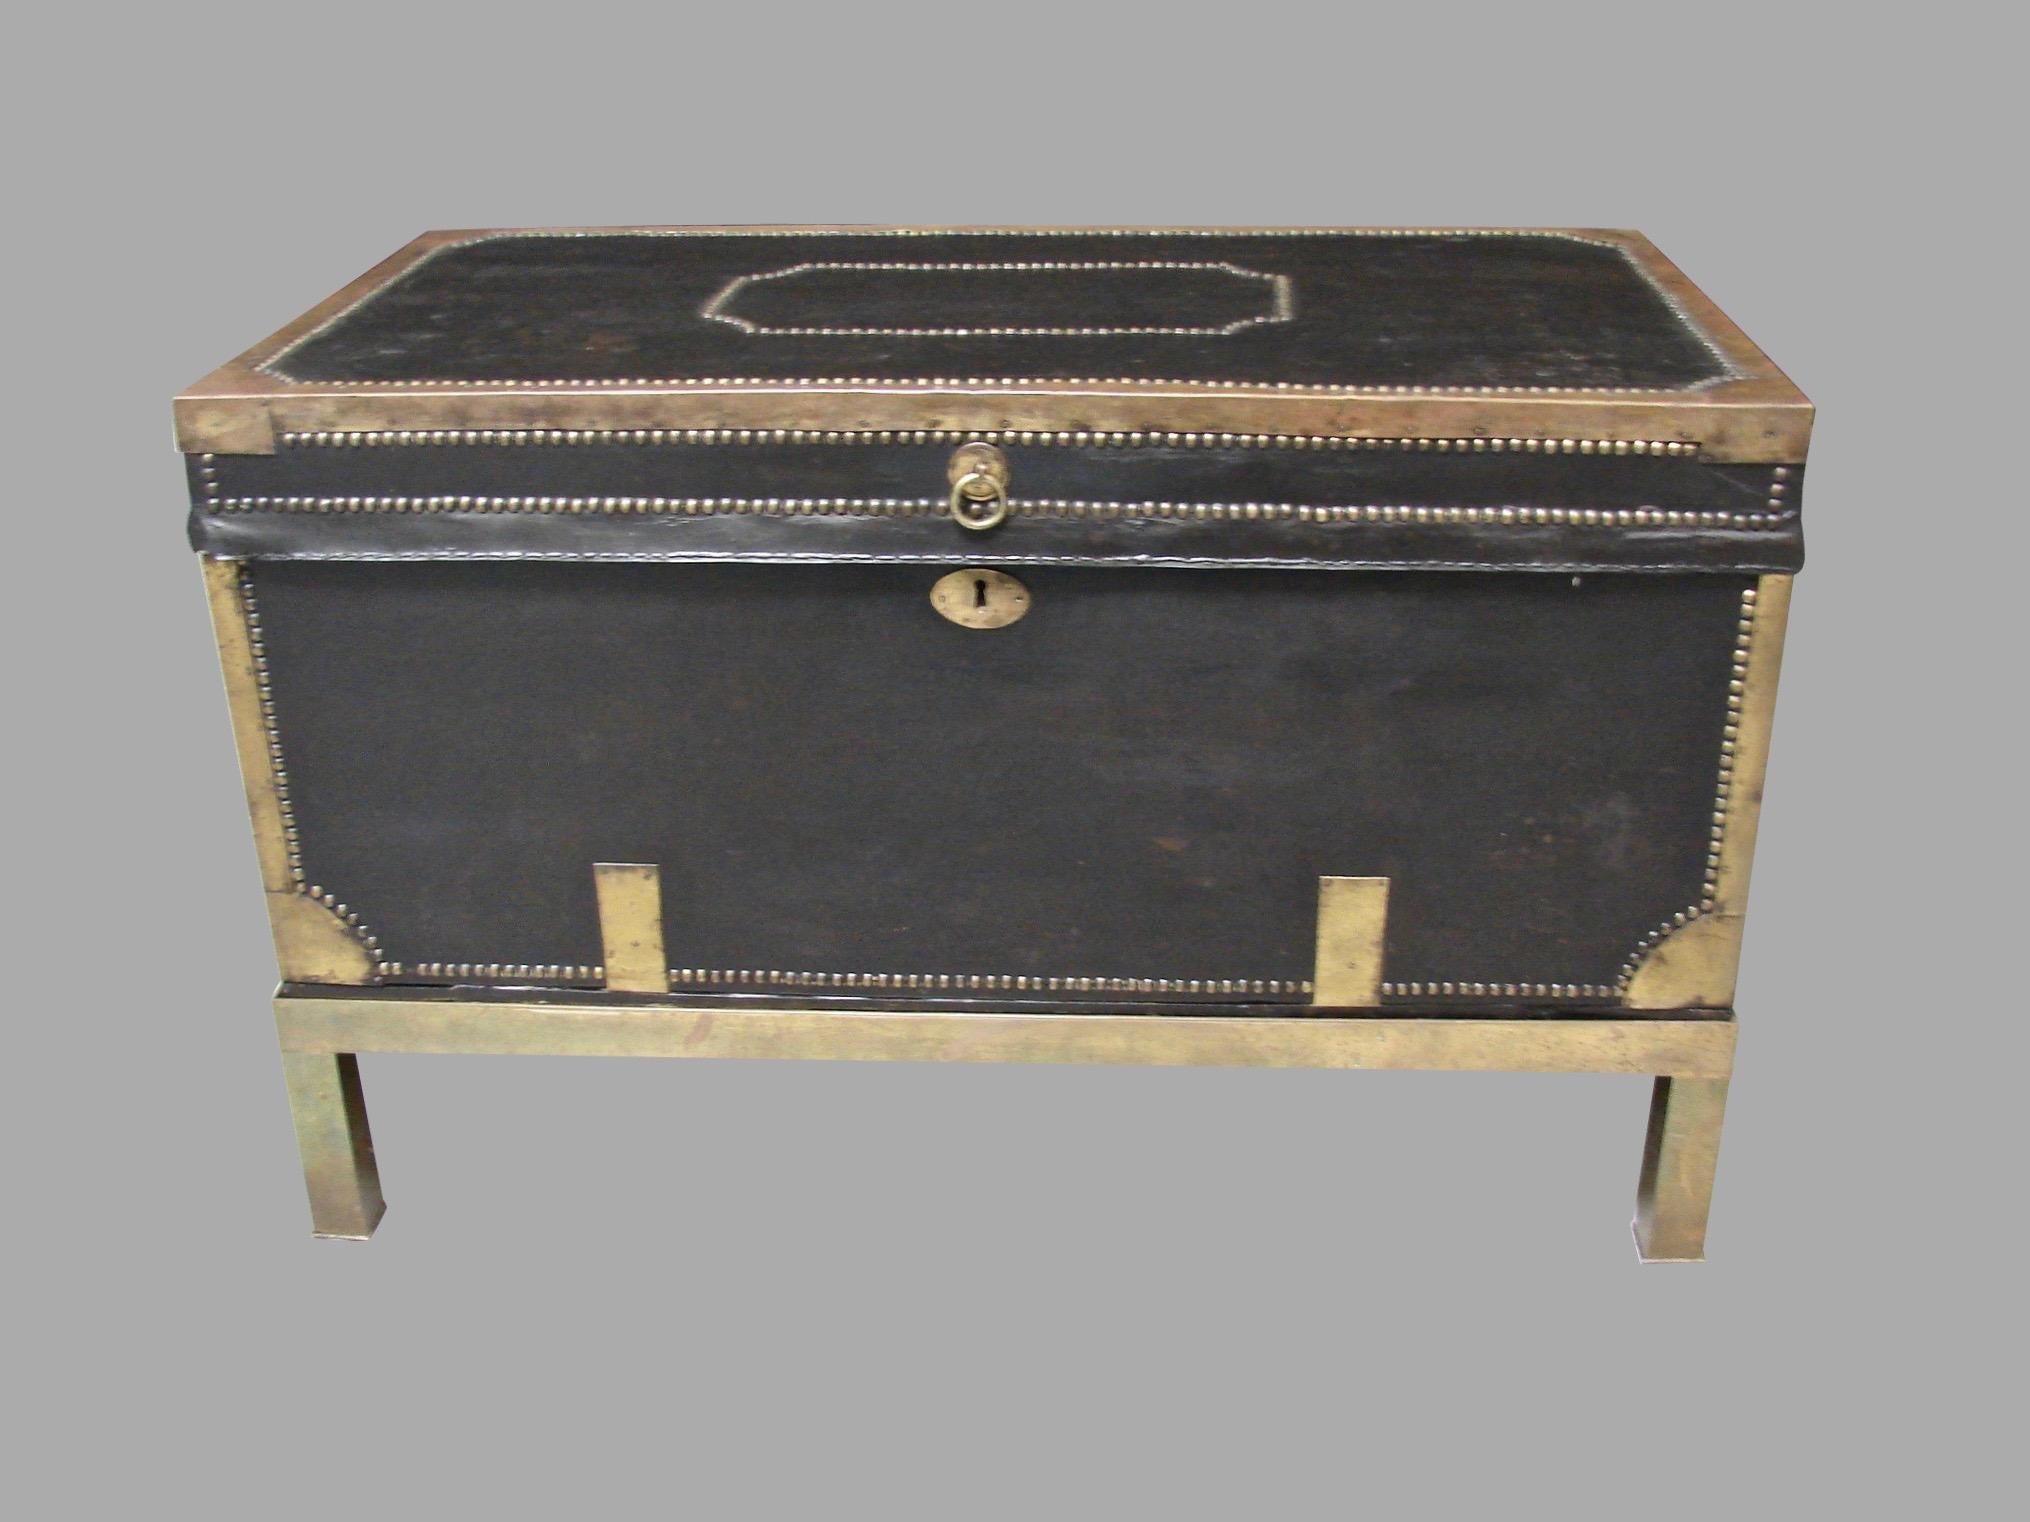 An English campaign style leather and brass mounted trunk, decorated overall with brass banding bordered by nailhead trim, the interior later lined in cut velvet now resting on a custom brass stand of a later date. Possibly of Chinese export origin.